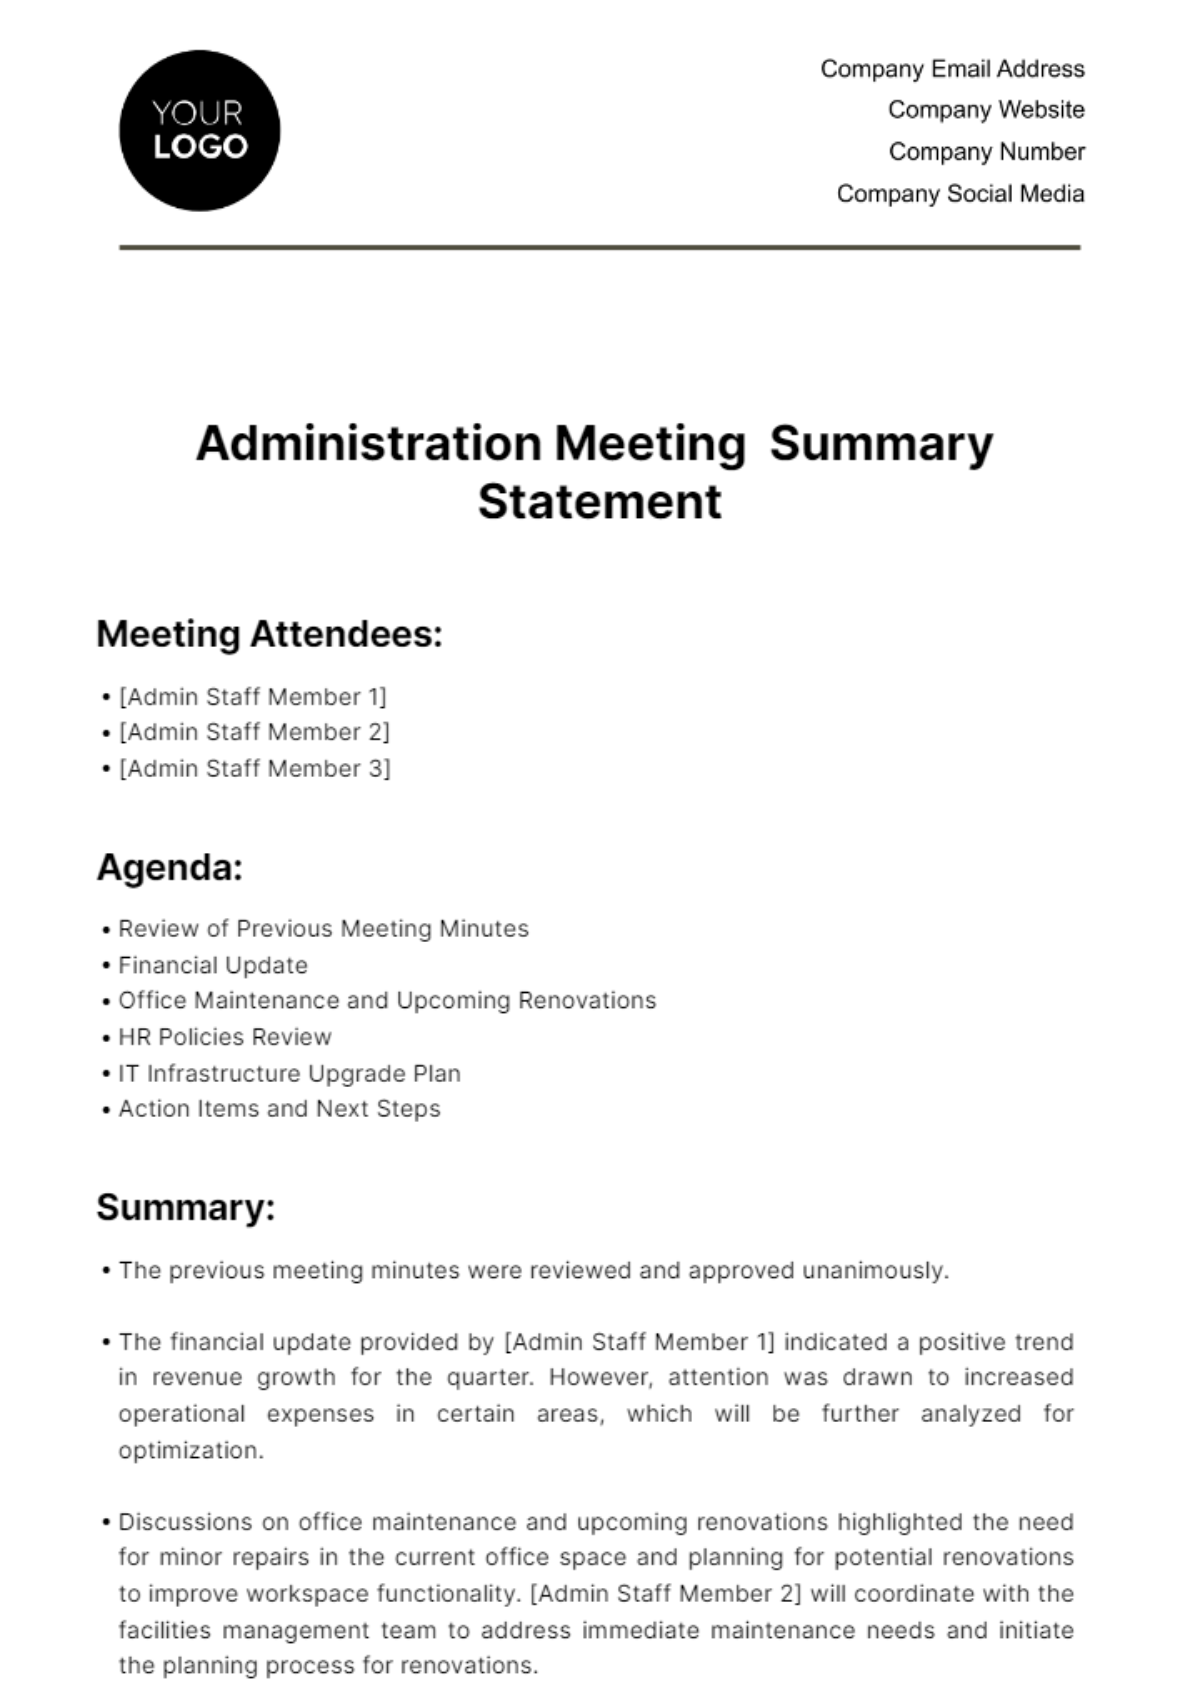 Free Administration Meeting Summary Statement Template